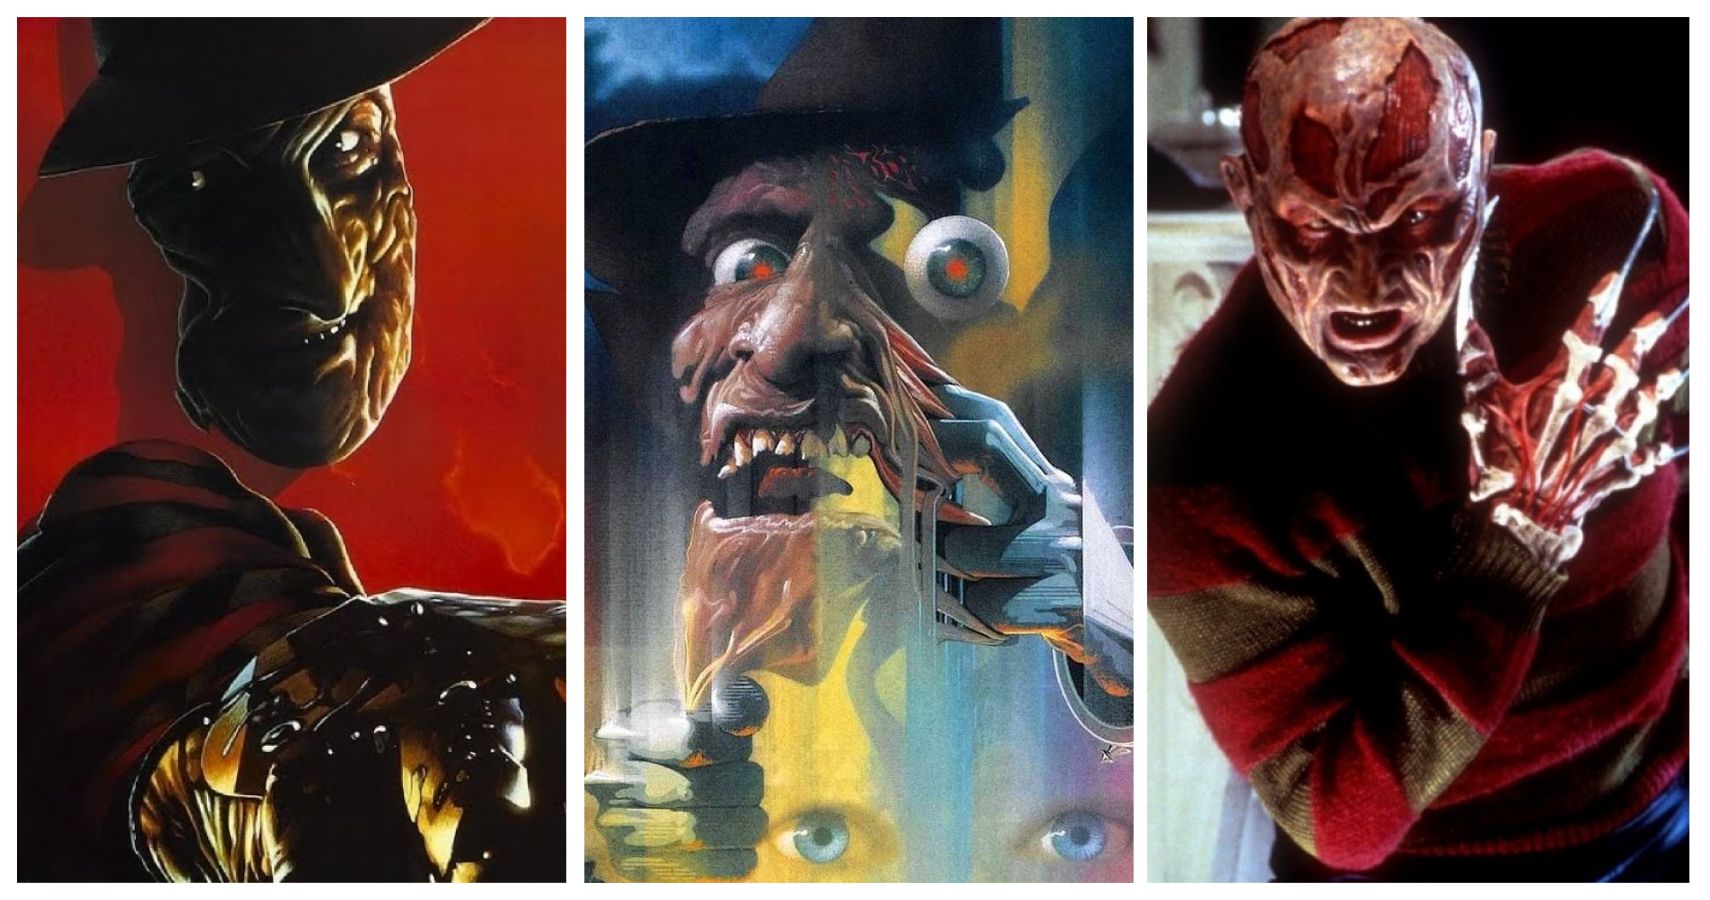 Freddy's Nightmares - Ranking All 44 Episodes of the Elm Street